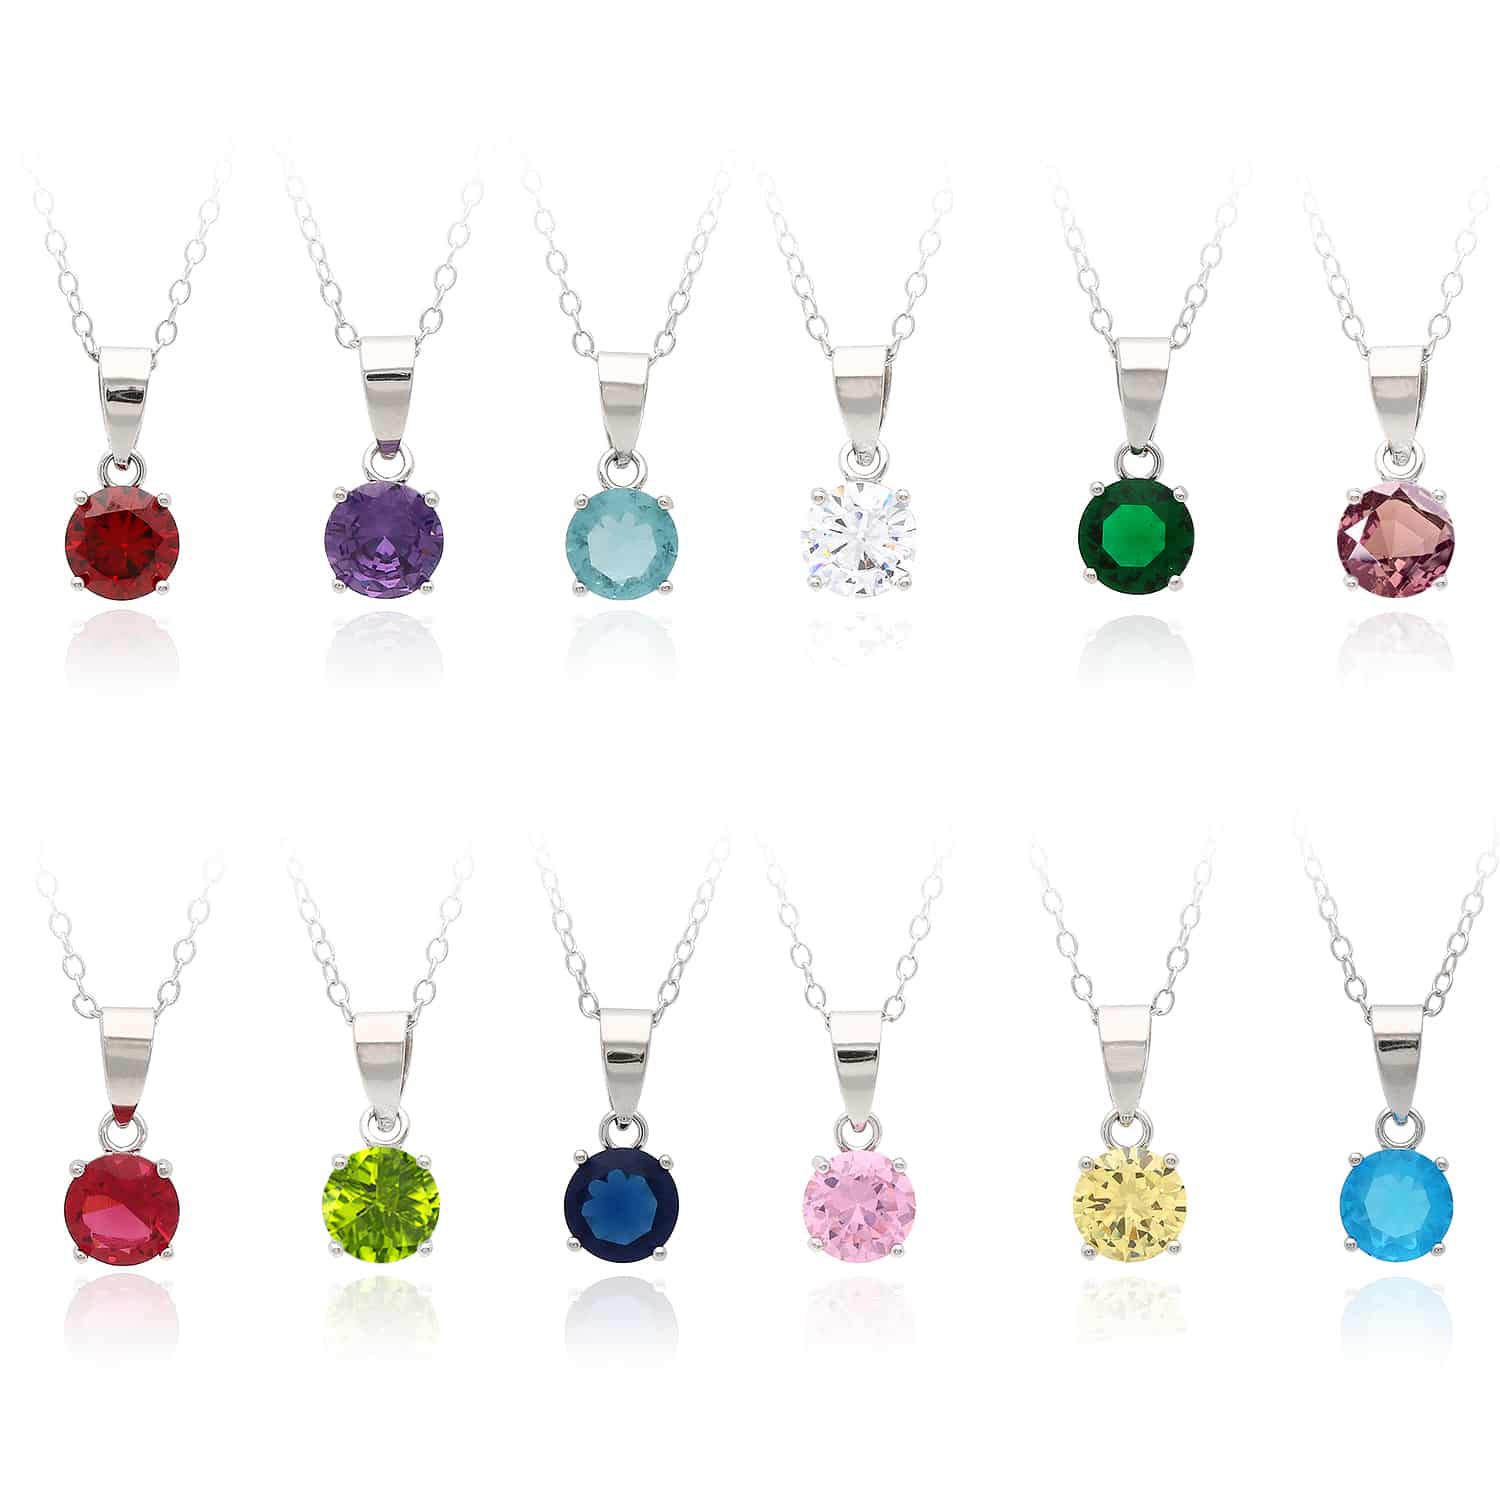 Sterling Silver Round-Cut Solitaire Birthstone Pendant Chain Necklace 16-18" Adj - April - Simulated Diamond